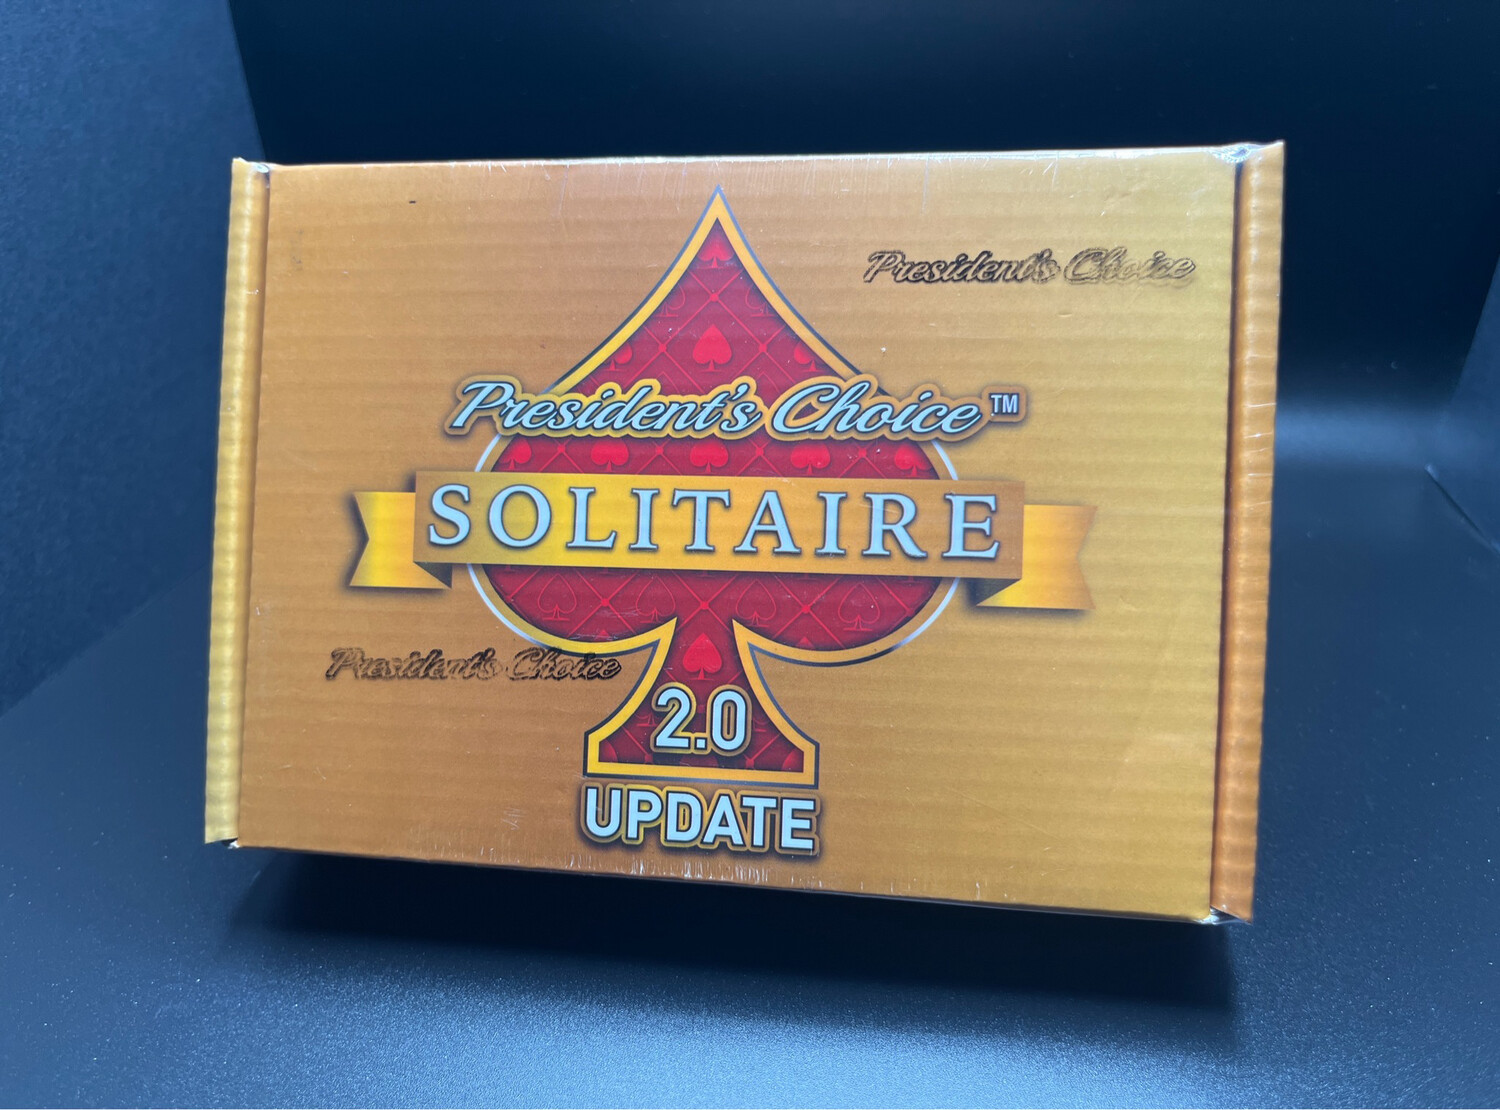 2021 Presidents Choice Solitaire 2.0 Update